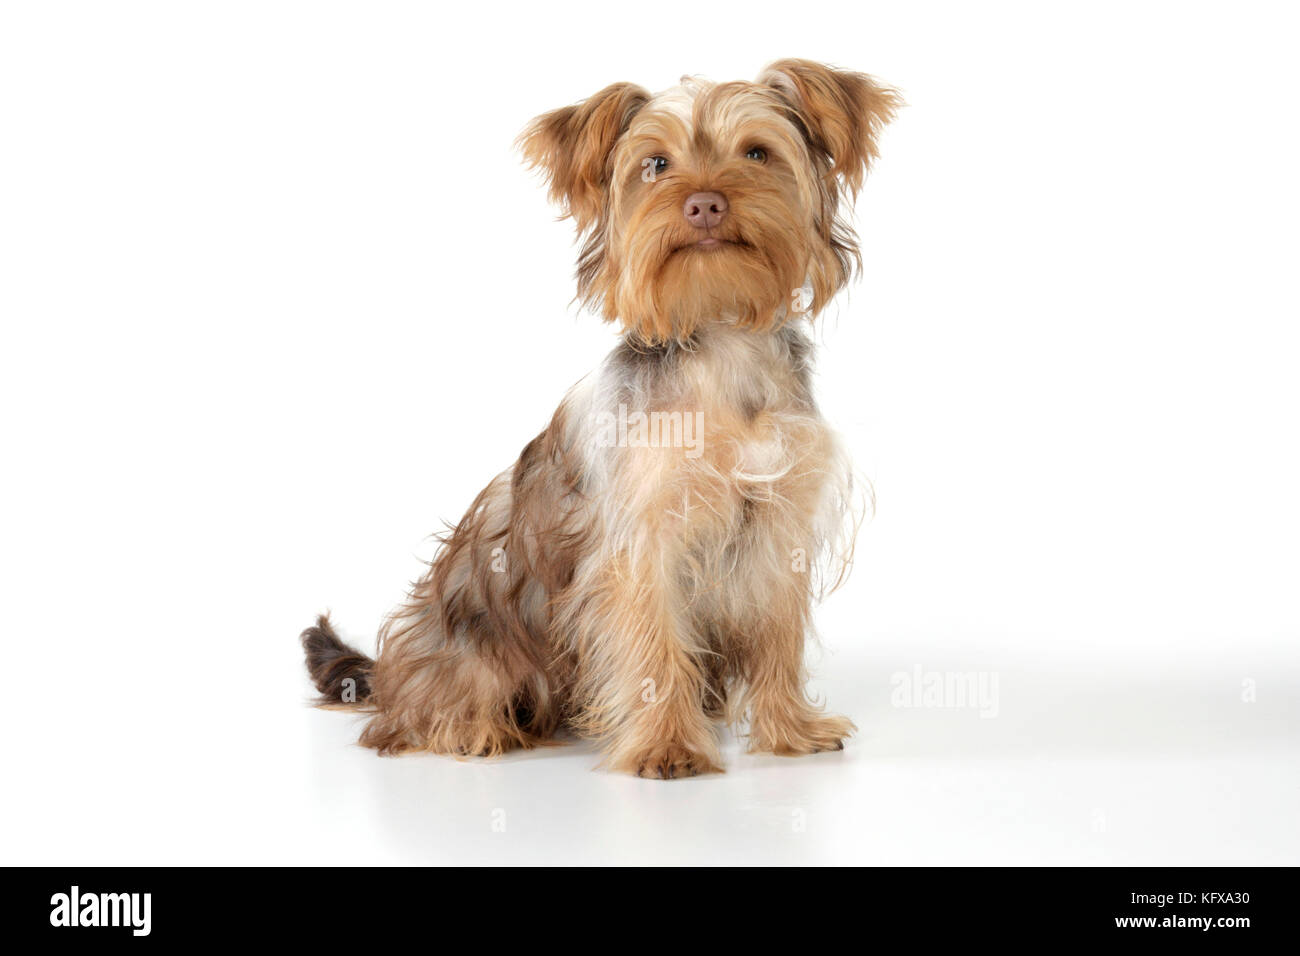 Dog - Poodle X Yorkie, ( Yoodle or Yorkie Poo ). Cross breed of Poodle and Yorkshire Terrier. Stock Photo